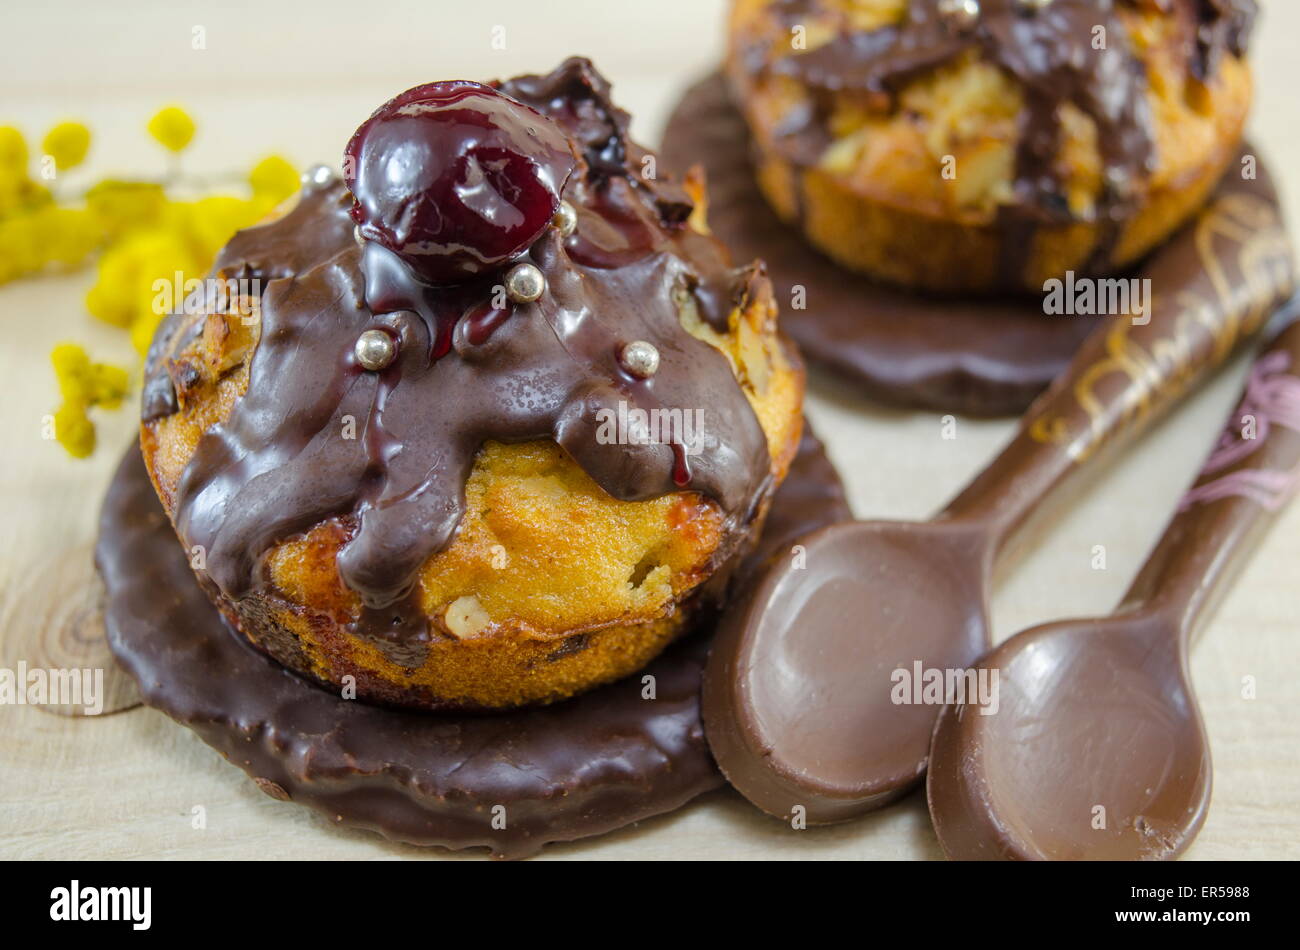 Homemade donuts glazed with chocolate with a cherry on top Stock Photo